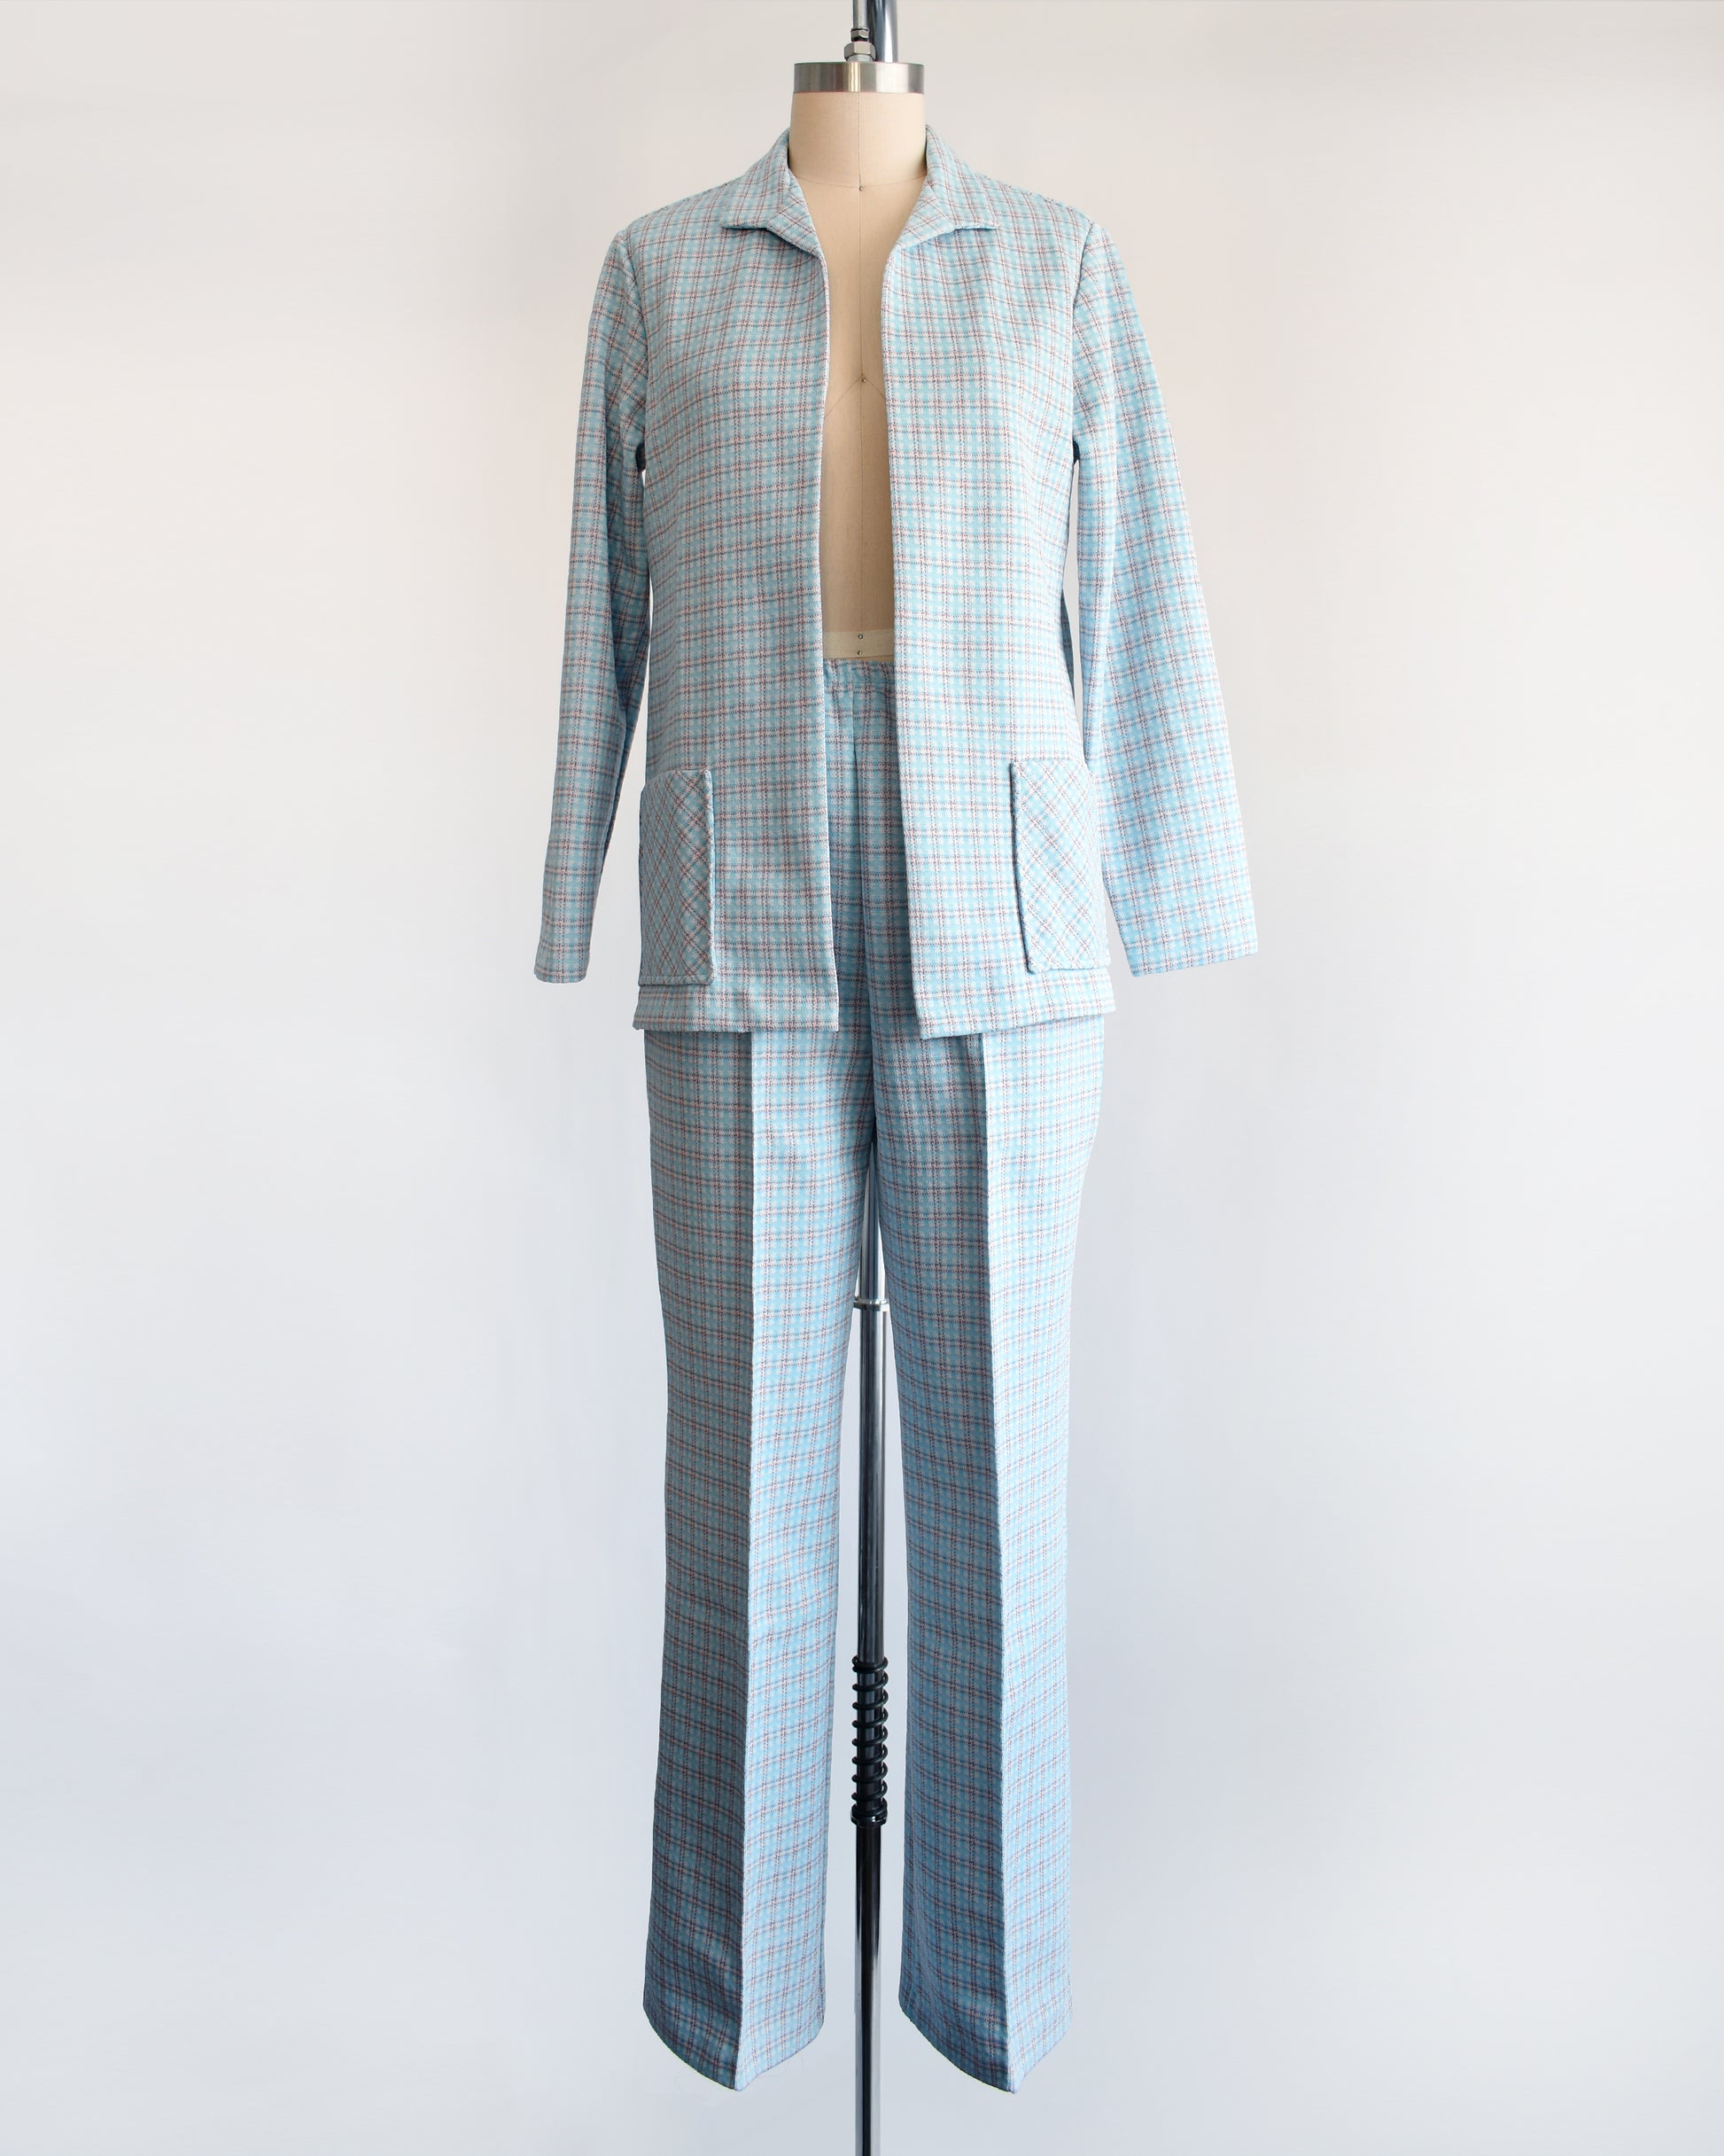 A  vintage 1970s blue, white, and orange plaid pantsuit. This set includes a blazer and matching wide leg pants.